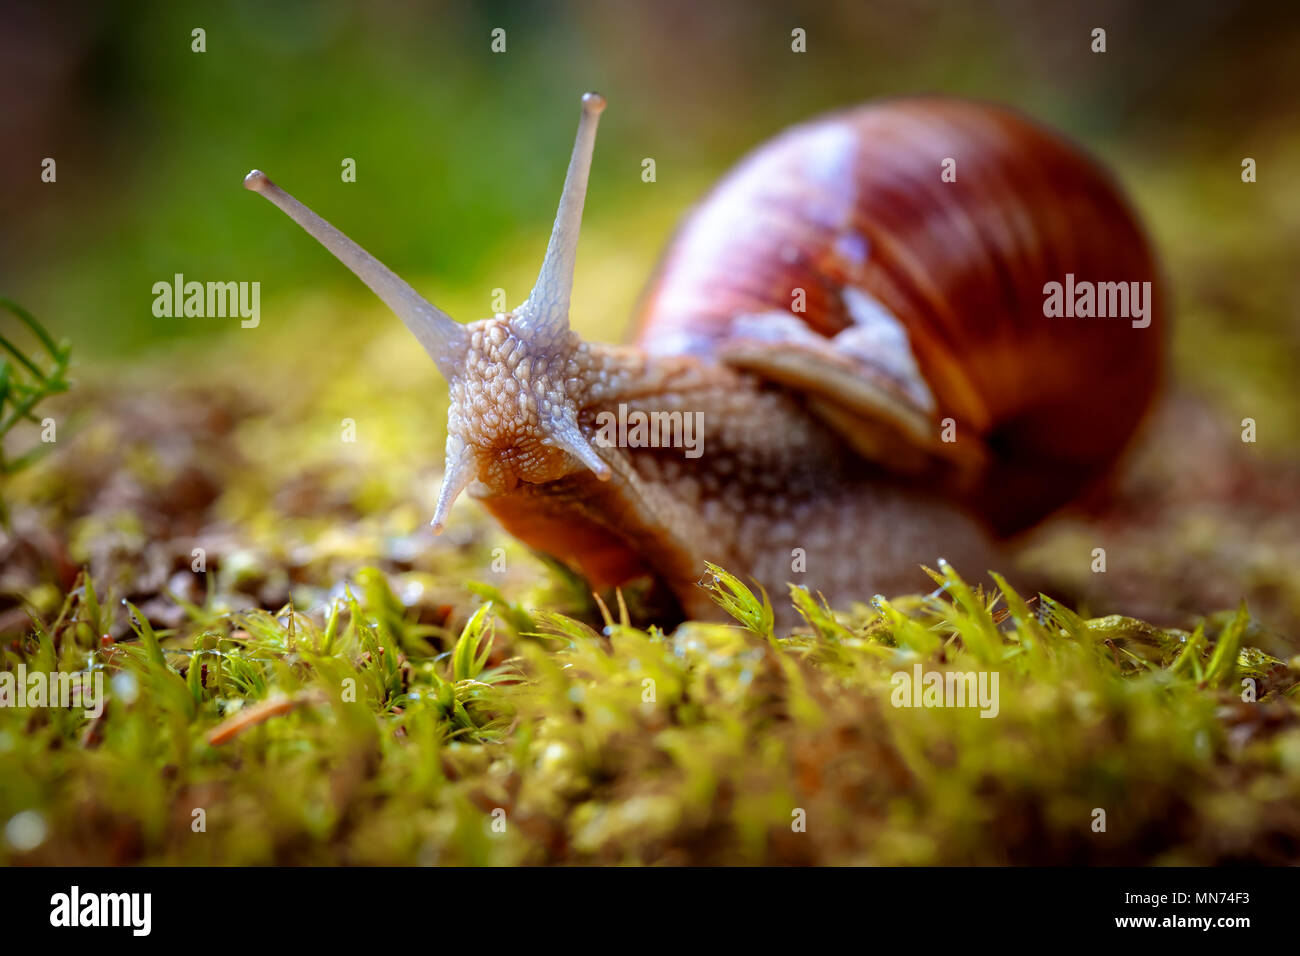 Helix pomatia also Roman snail, Burgundy snail, edible snail or escargot, is a species of large, edible, air-breathing land snail, a terrestrial pulmonate gastropod mollusk in the family Helicidae. Stock Photo